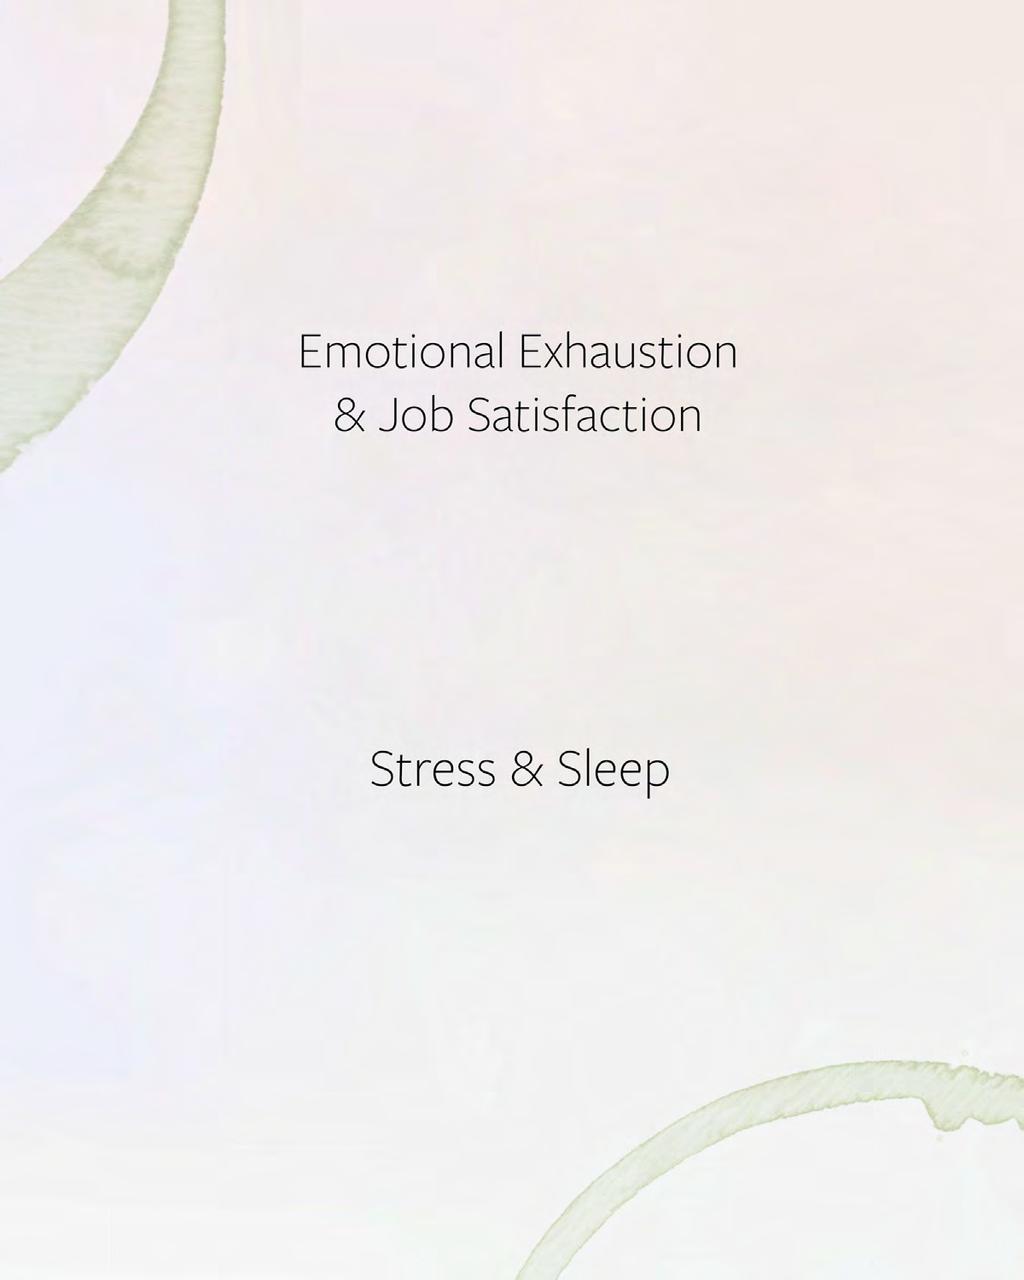 After 5 days of mindfulness training on 219 employees a study showed significantly less emotional exhaustion and more job satisfaction than the control group who did not receive any mindfulness